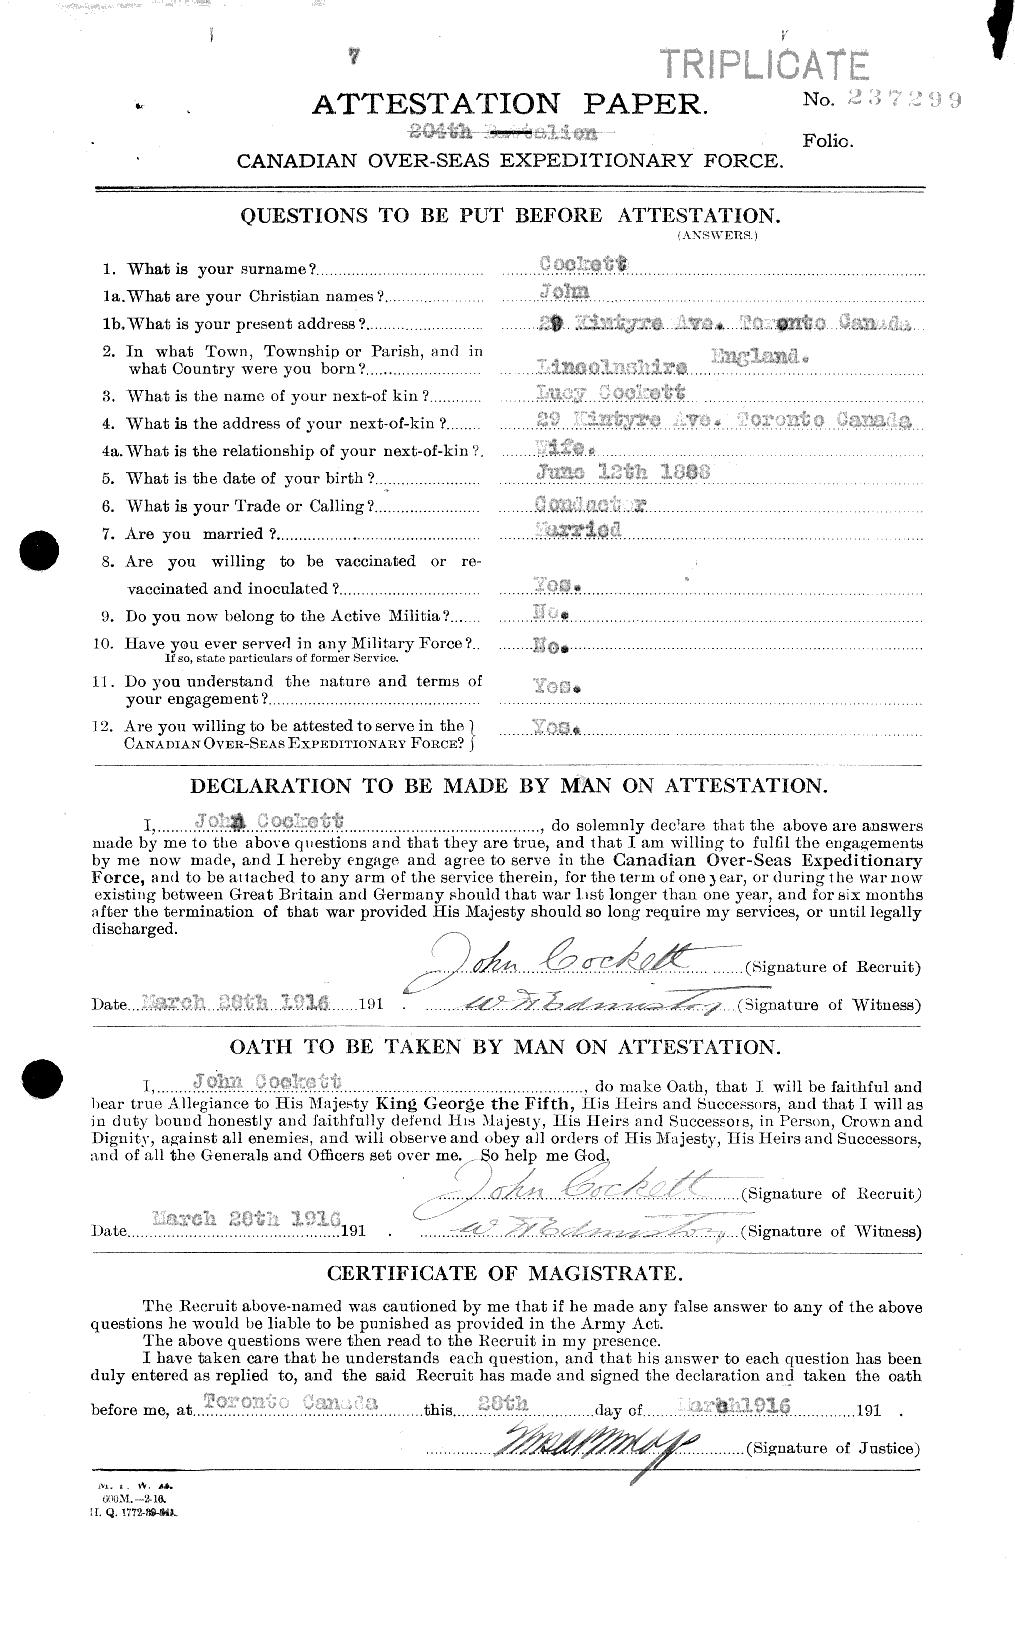 Personnel Records of the First World War - CEF 026674a